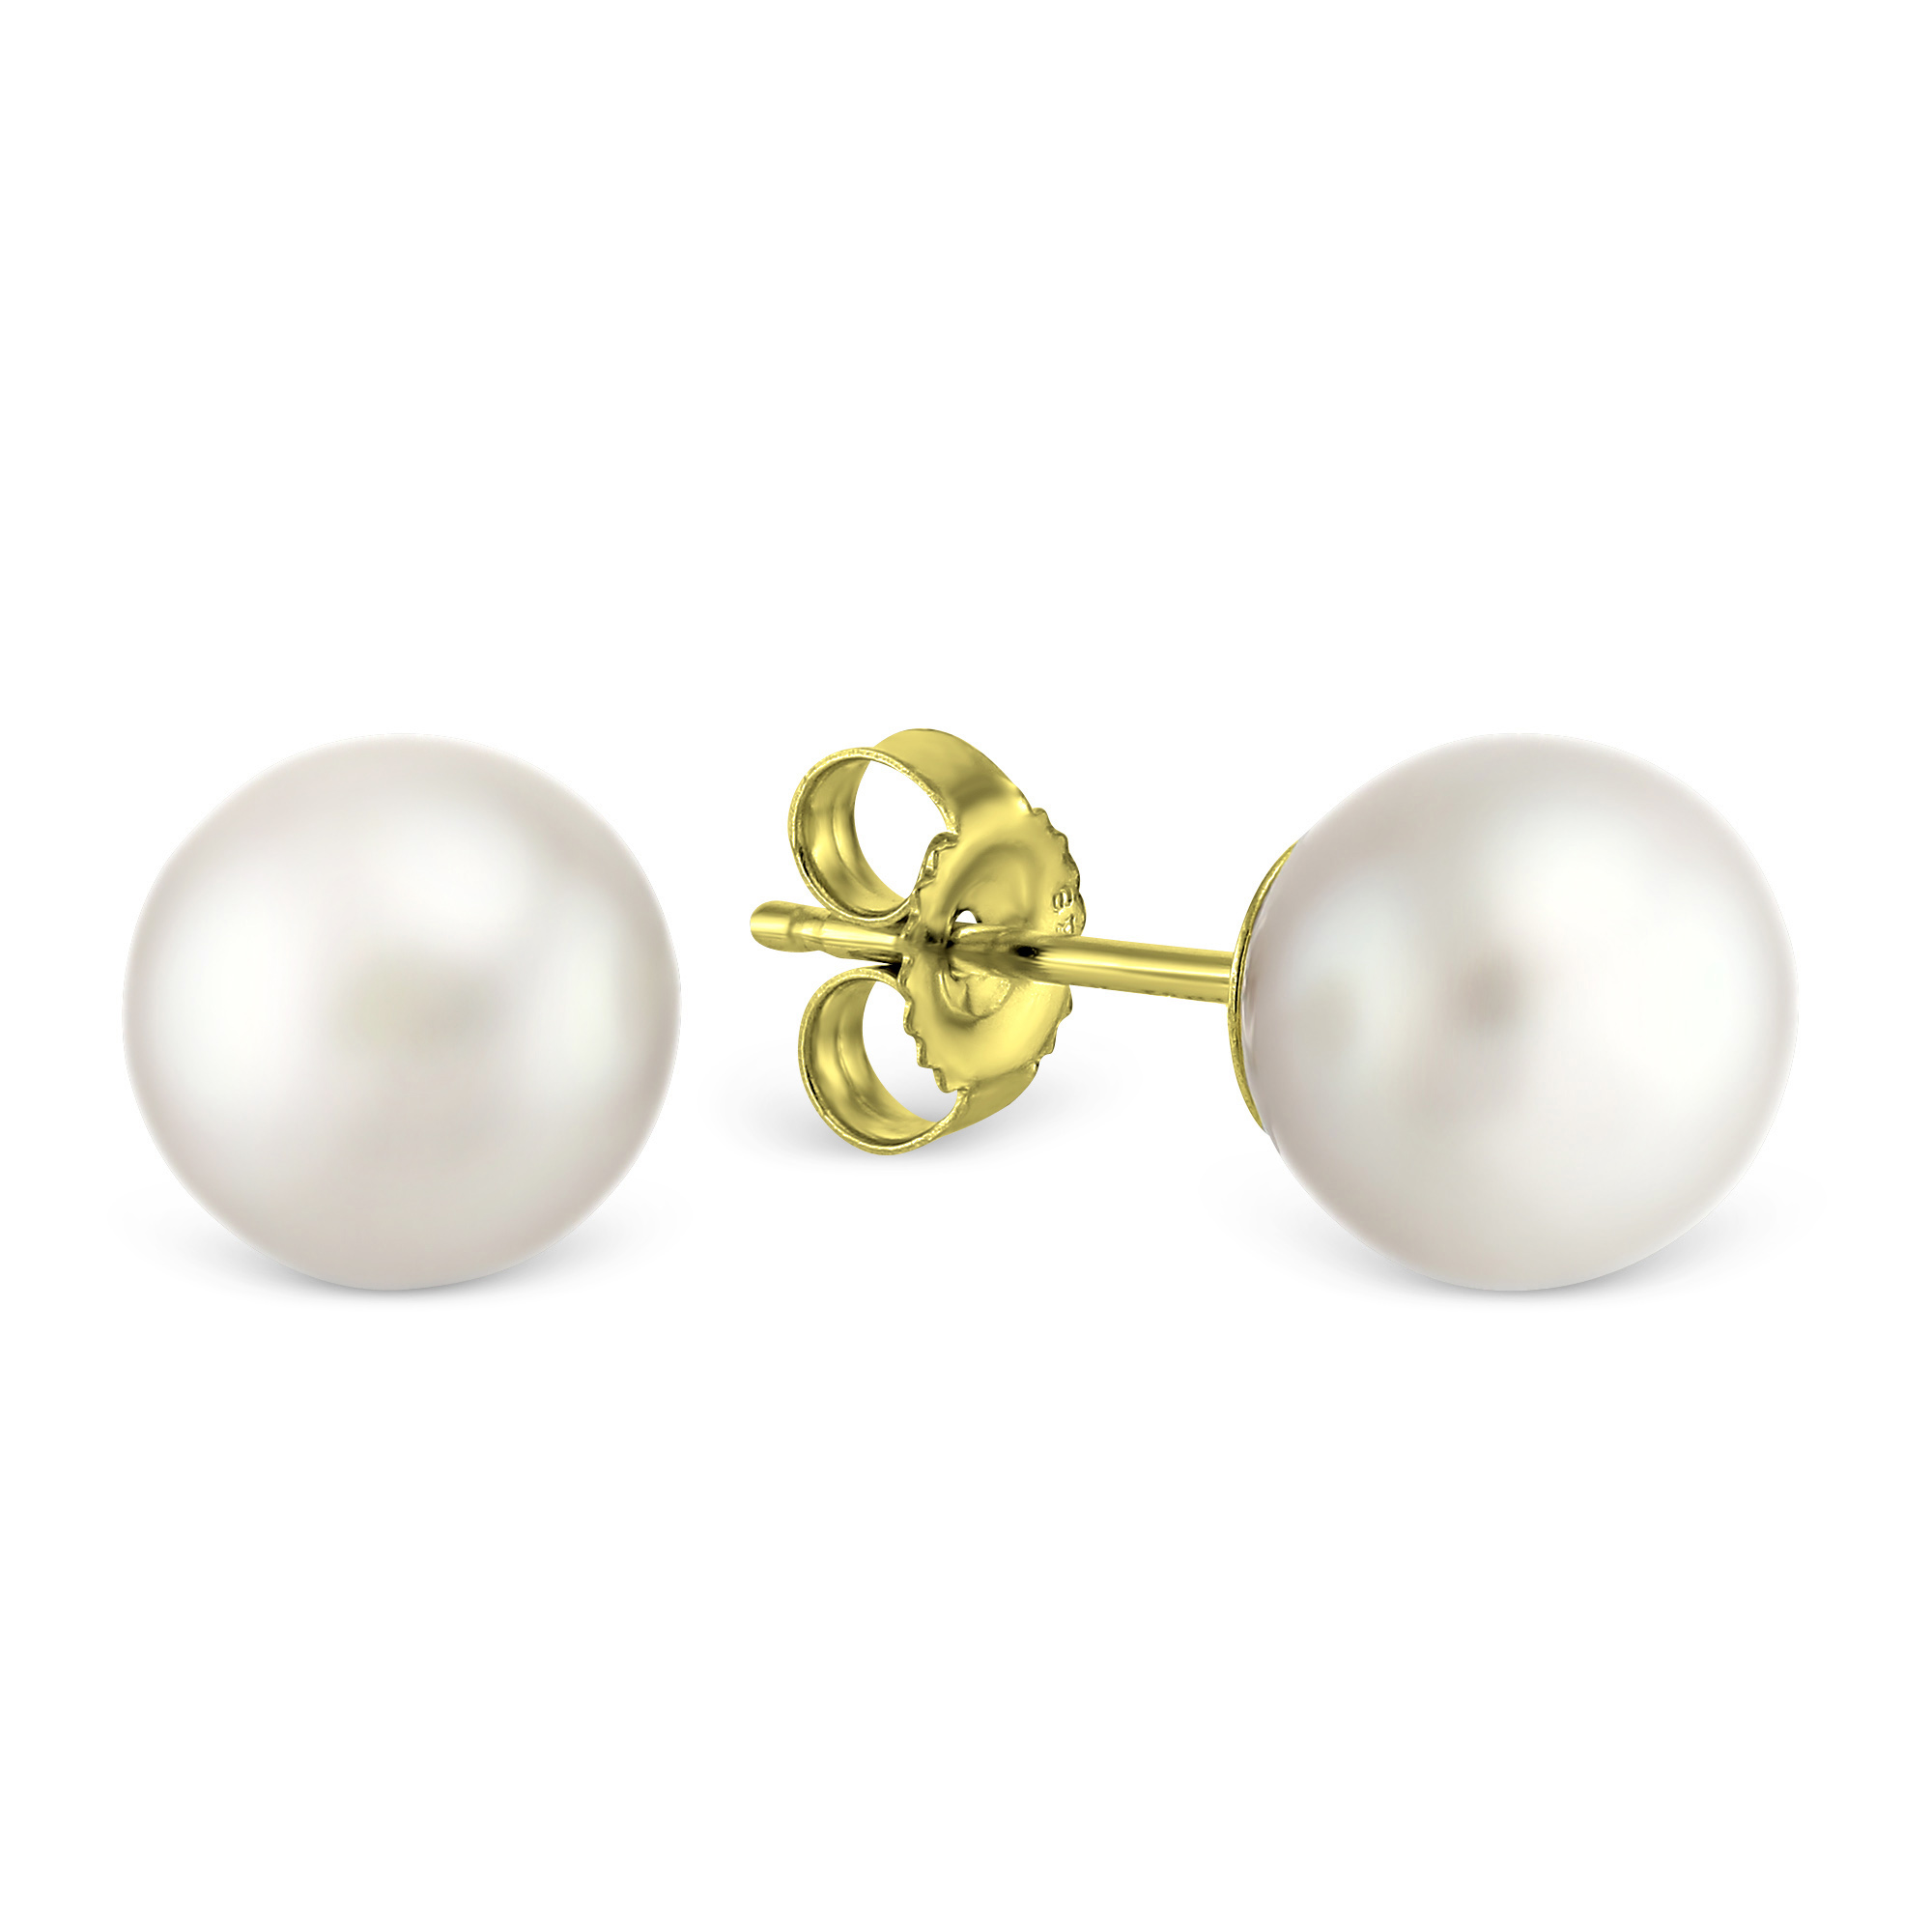 TARA Pearls Classic Collection 18k White Gold Natural Color Tahitian Cultured Pearl Stud Earrings 